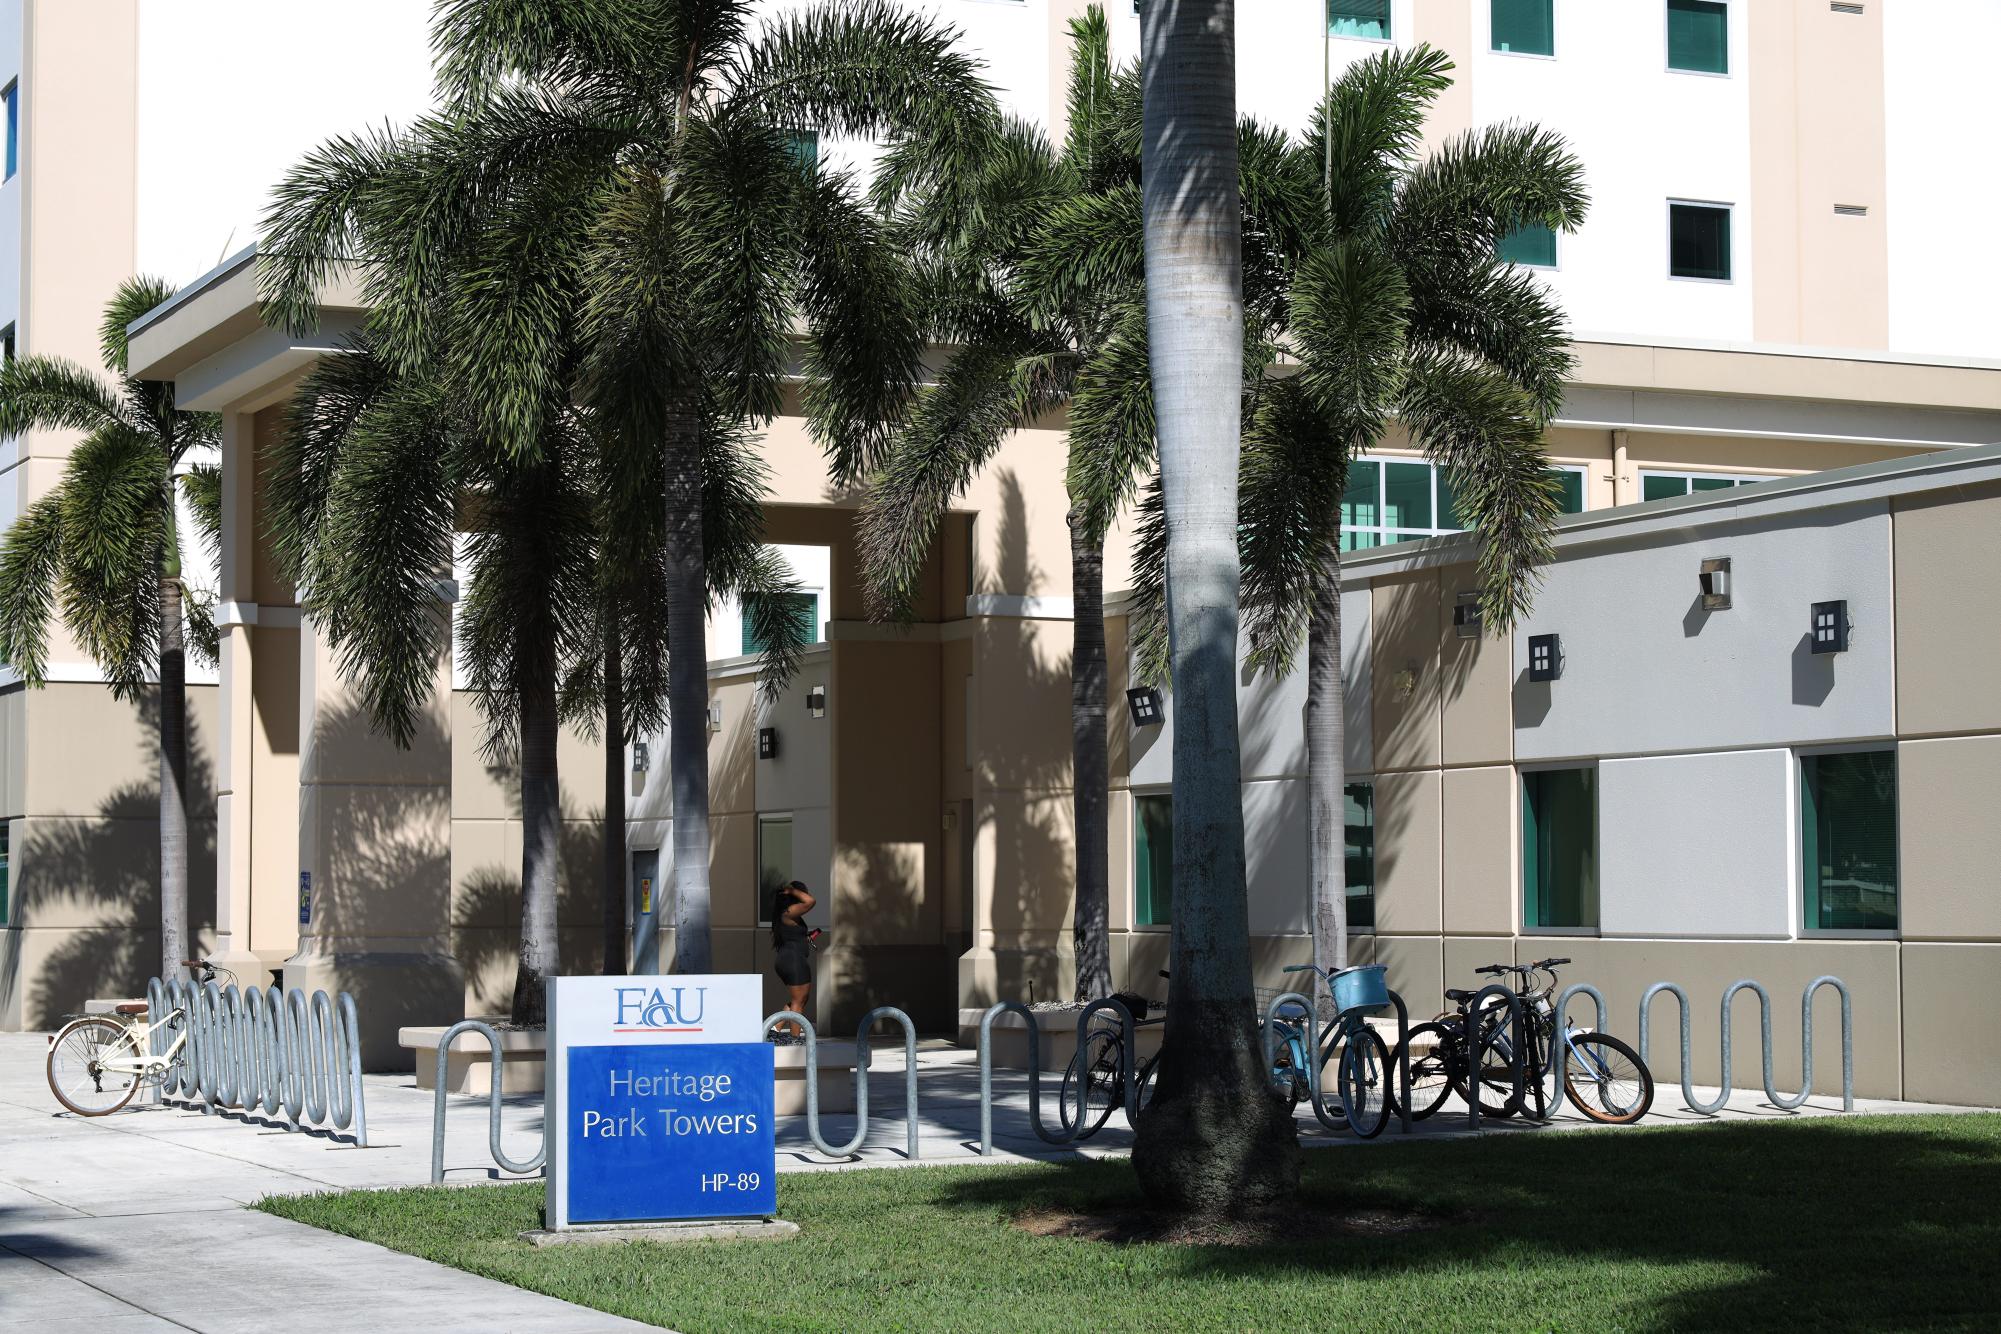 5 Tips to Know Before Attending College in Boca Raton